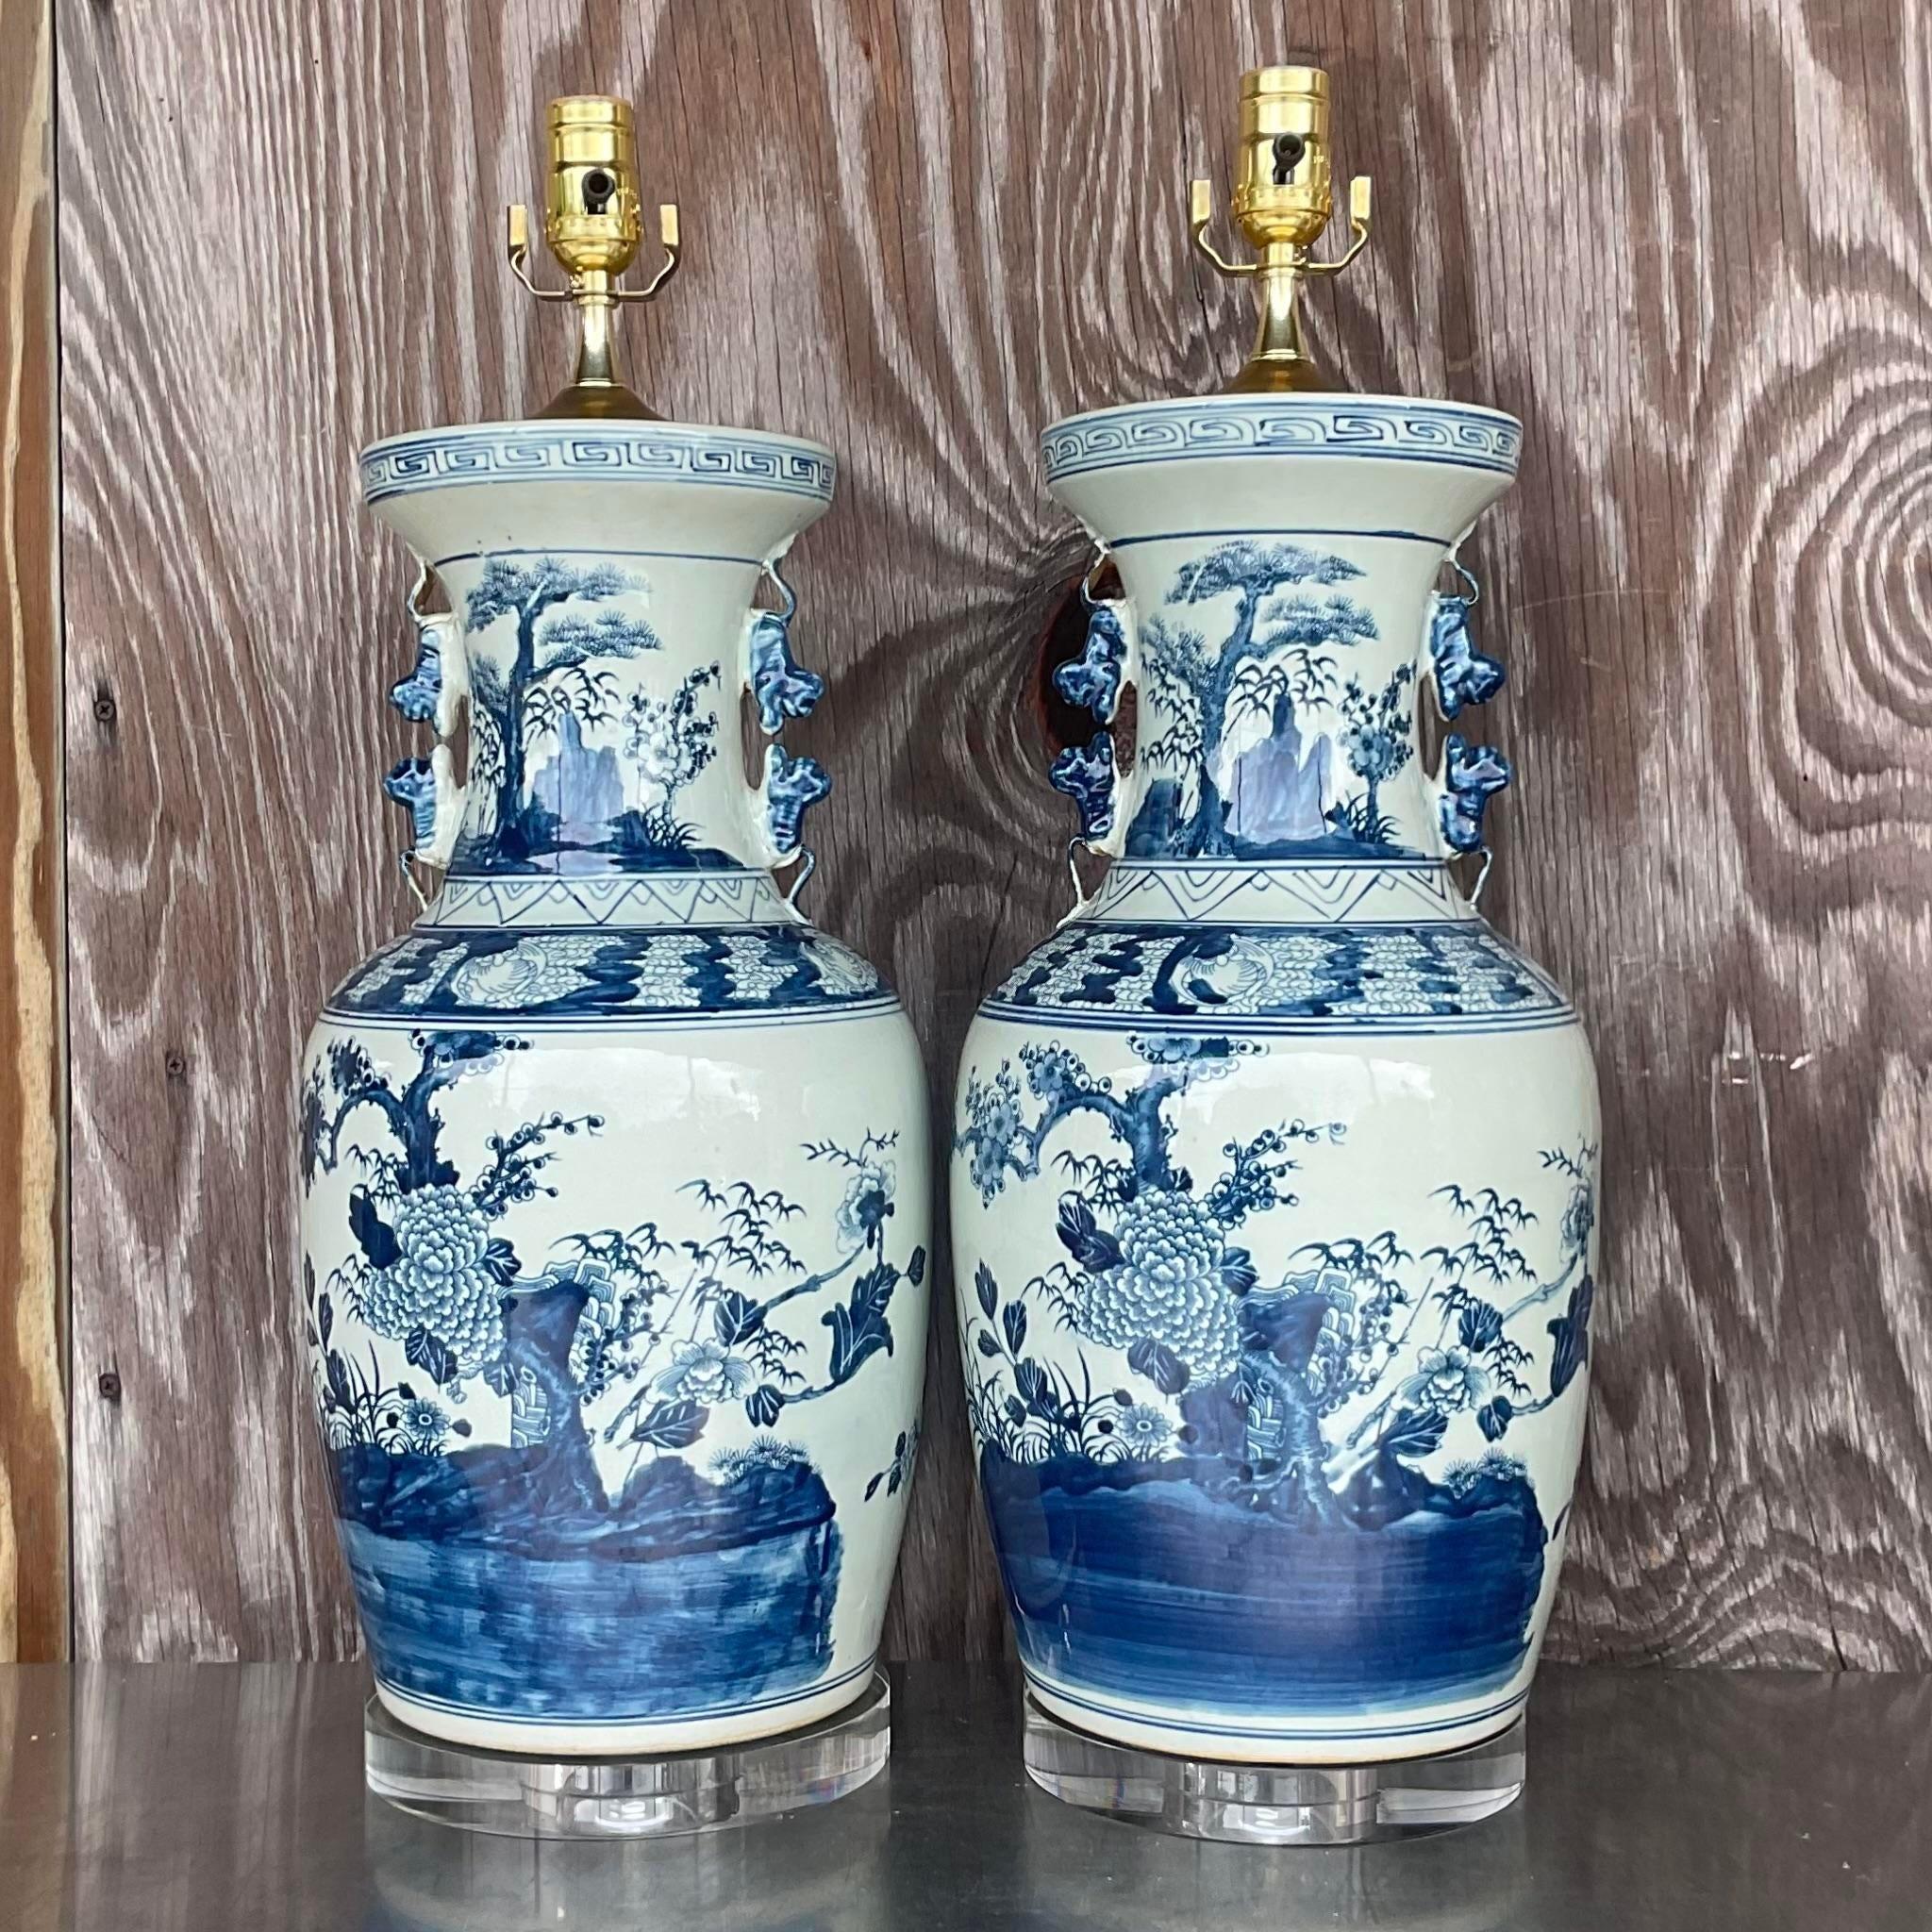 A gorgeous pair of vintage Asian table lamps. The classic gourd vase in an iconic pastoral design. Newly refurbished with all new wiring and hardware. Acquired from a Palm Beach estate.